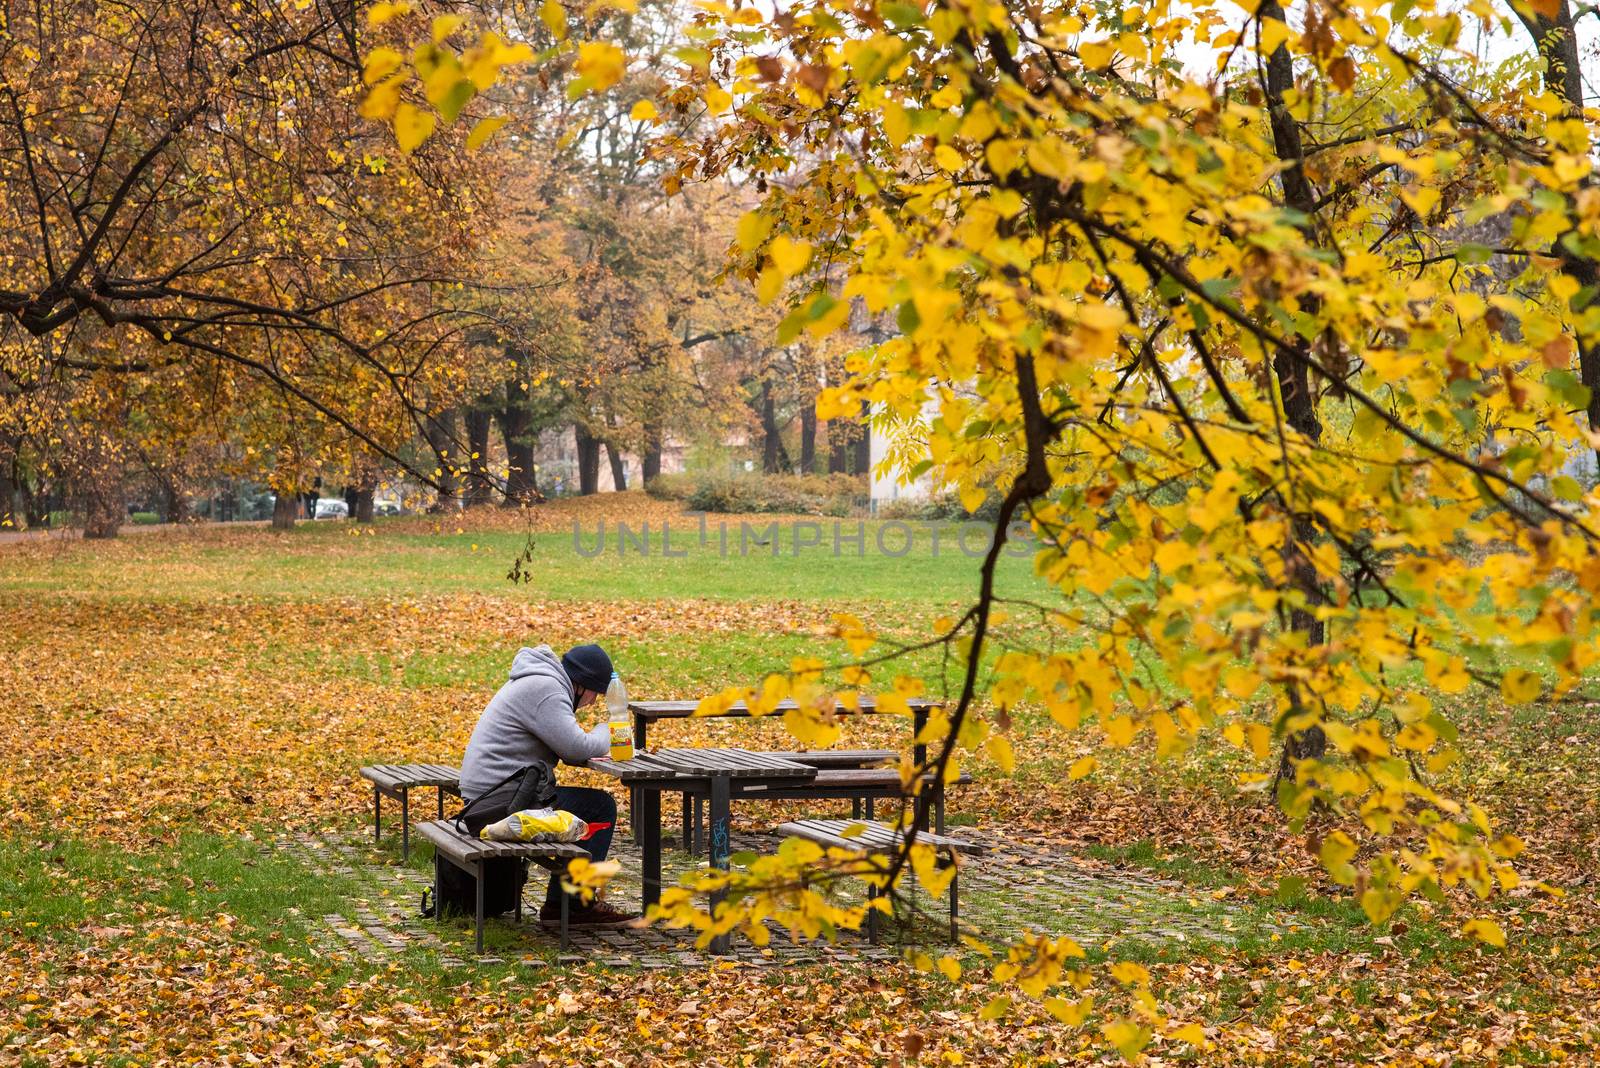 11/14/2020. Park Stromovka. Prague czech Republic. A man is sitting on a bench in the park on a Sunday winter day.